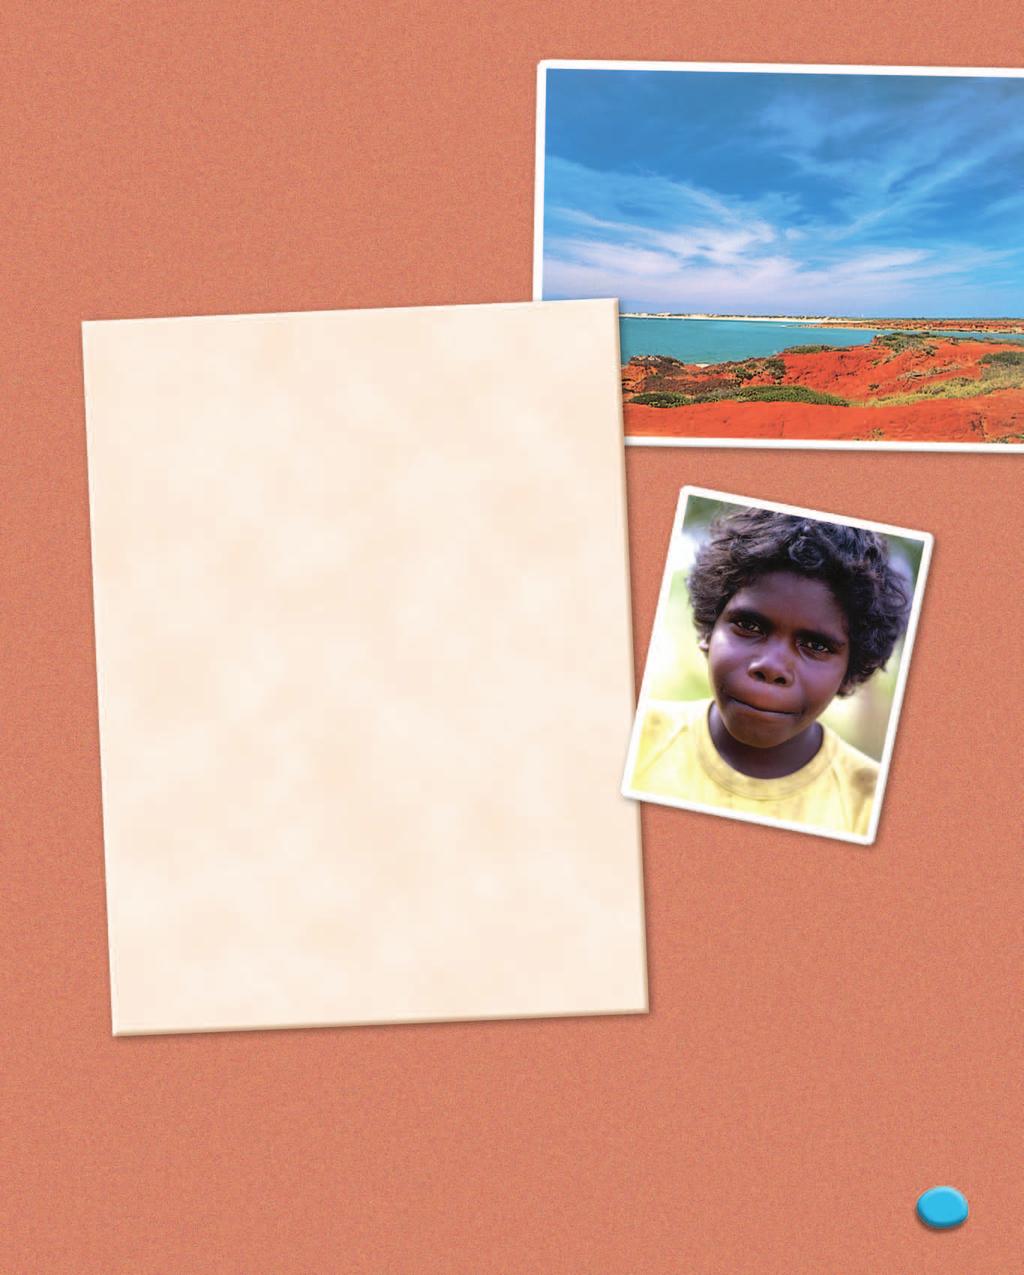 My name is Dion Have you got a pen friend? Where does your pen friend live? Life and culture Bidyadanga PO Box 1673 Broome Western Australia 6725 3rd March Hi! My name is Dion and I am 11 years old.